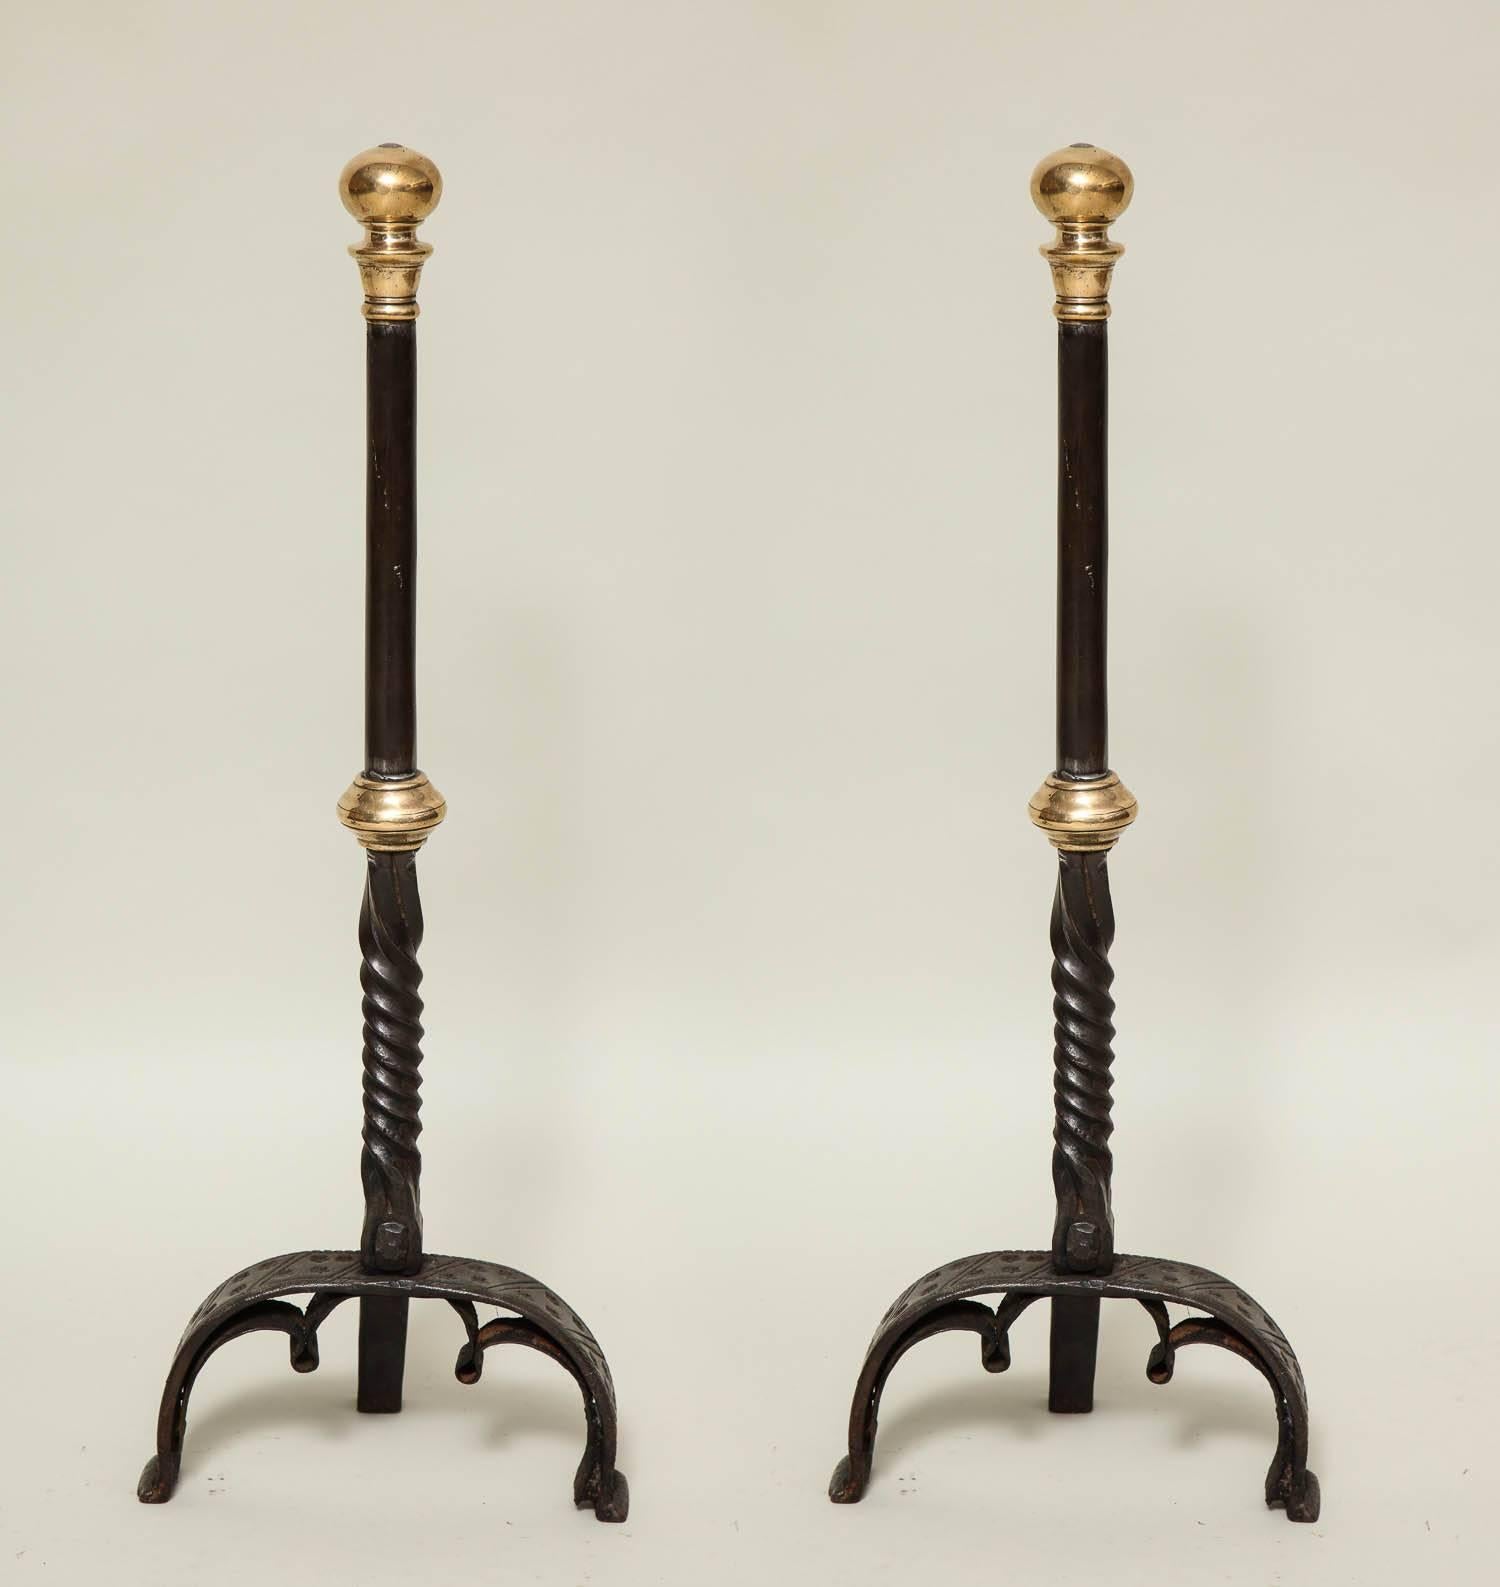 Fine pair of bold baroque bronze and wrought iron andirons, having suppressed bronze ball finials and collars, the wrought iron shafts with barley twist bases and standing on arched legs with trefoil arched details, the firedog portion reduced in